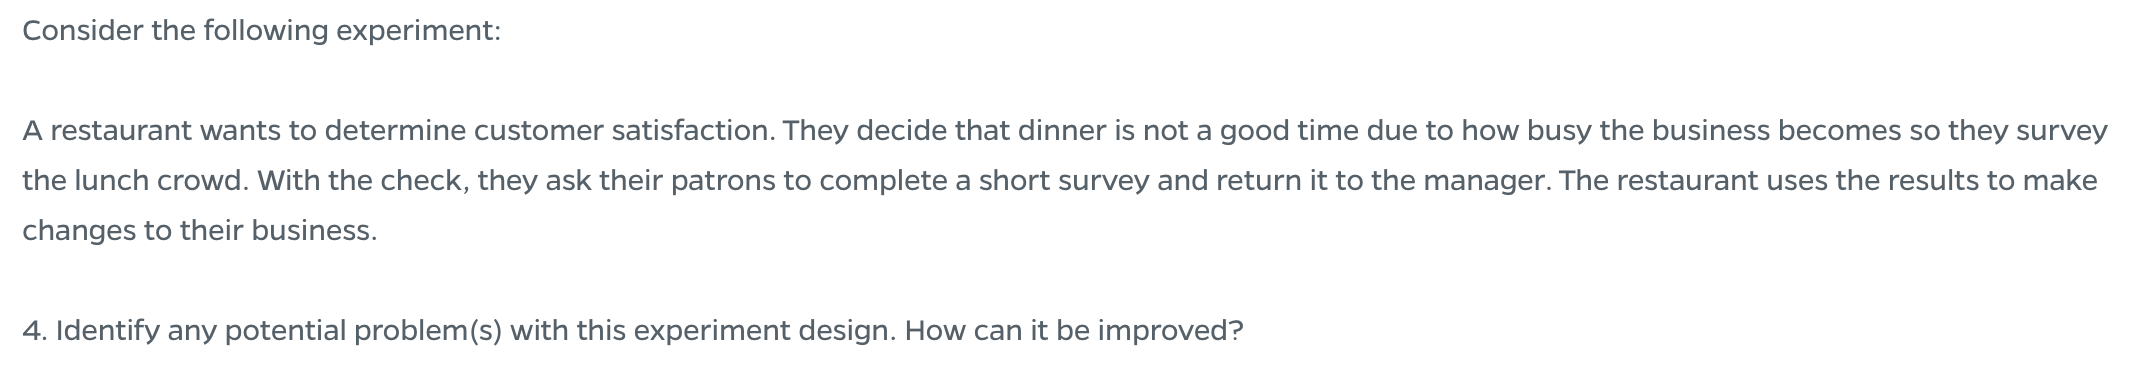 Consider The Following Experiment A Restaurant Wants To Determine Customer Satisfaction They Decide That Dinner Is Not 1